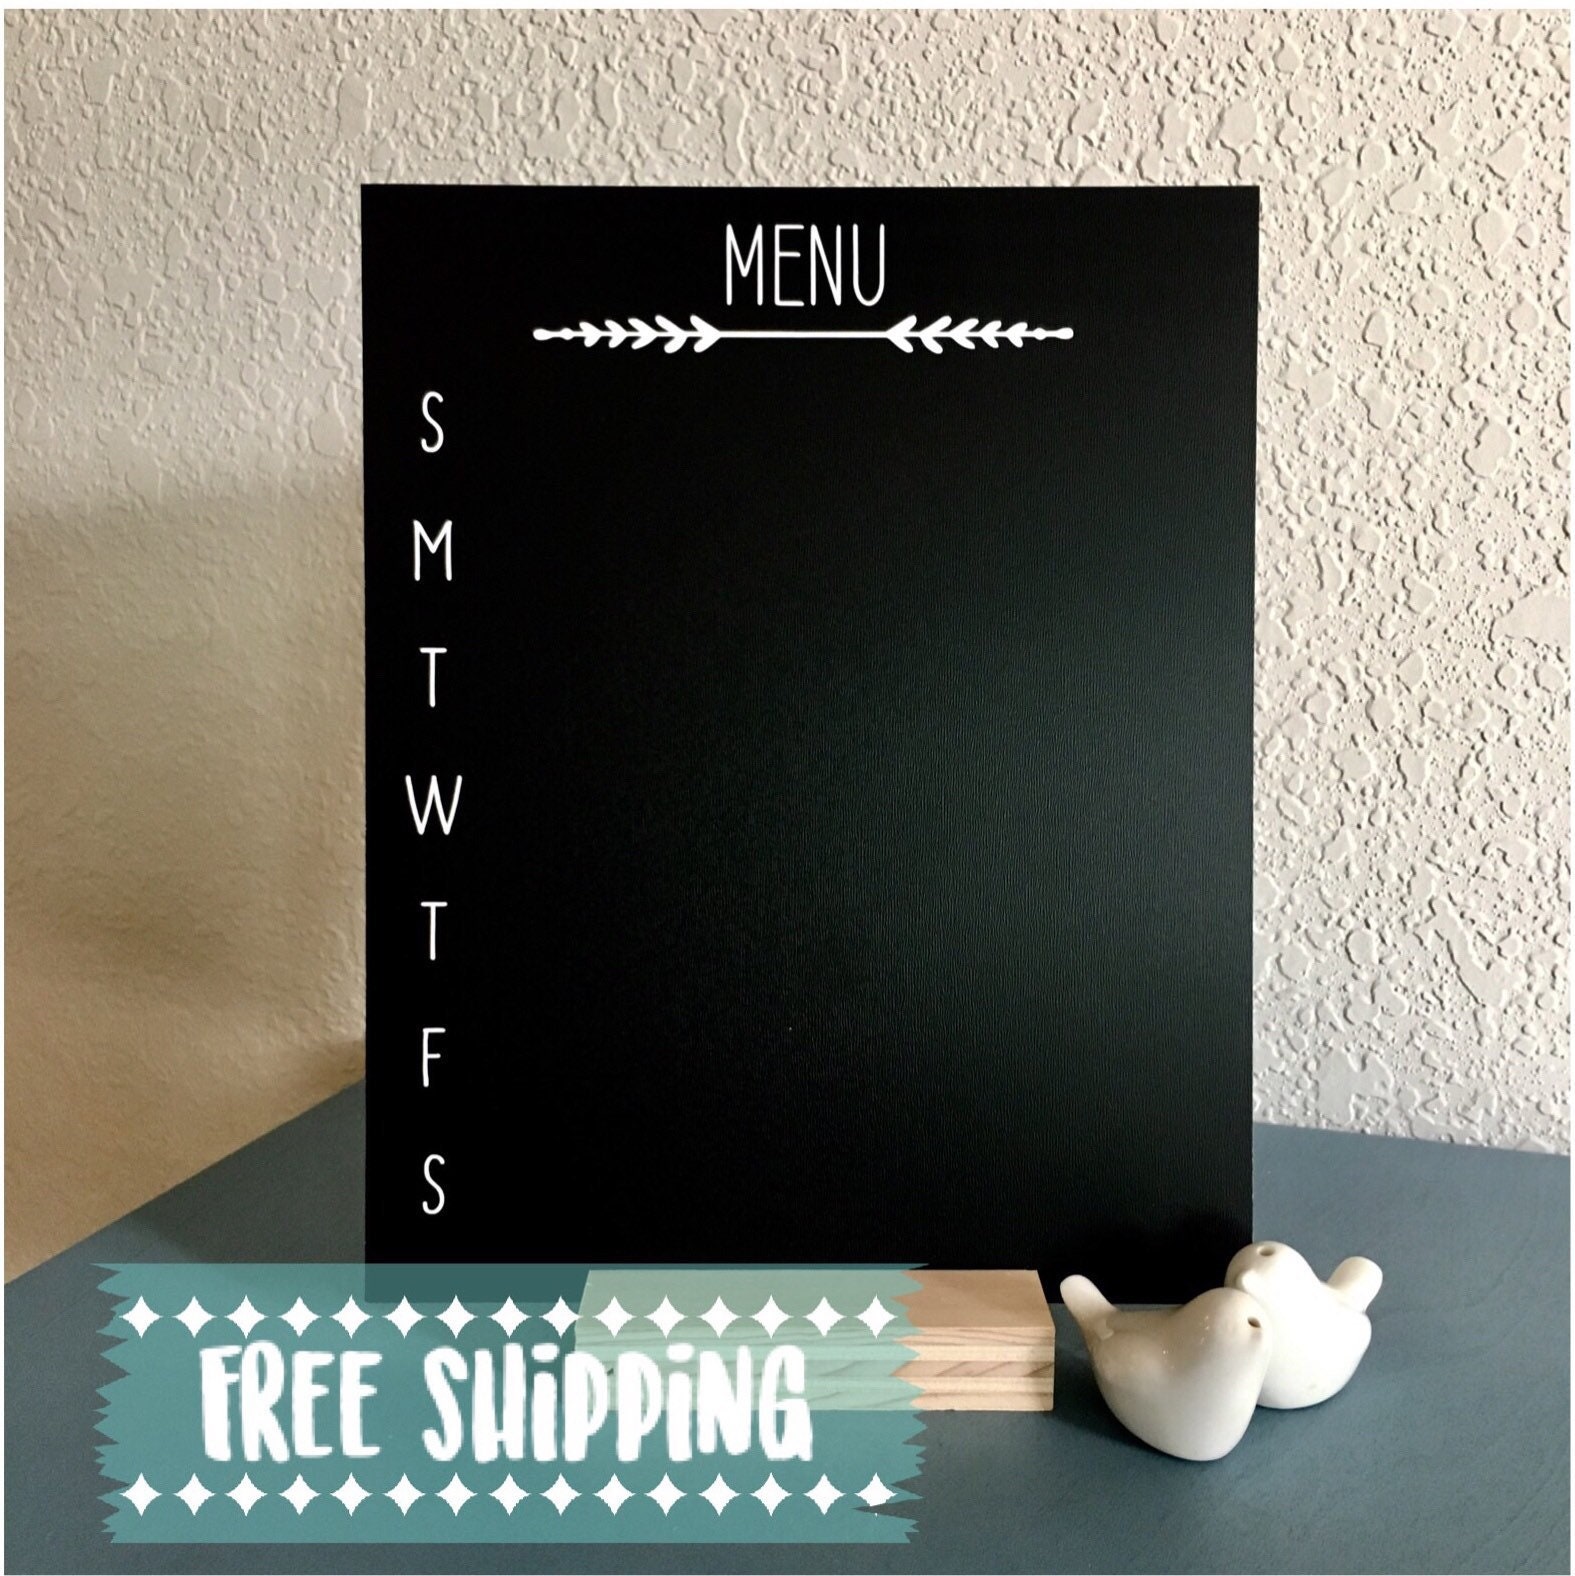 6 Sizes/4 Colors - Small Chalkboard Sign Menu Board for Kitchen